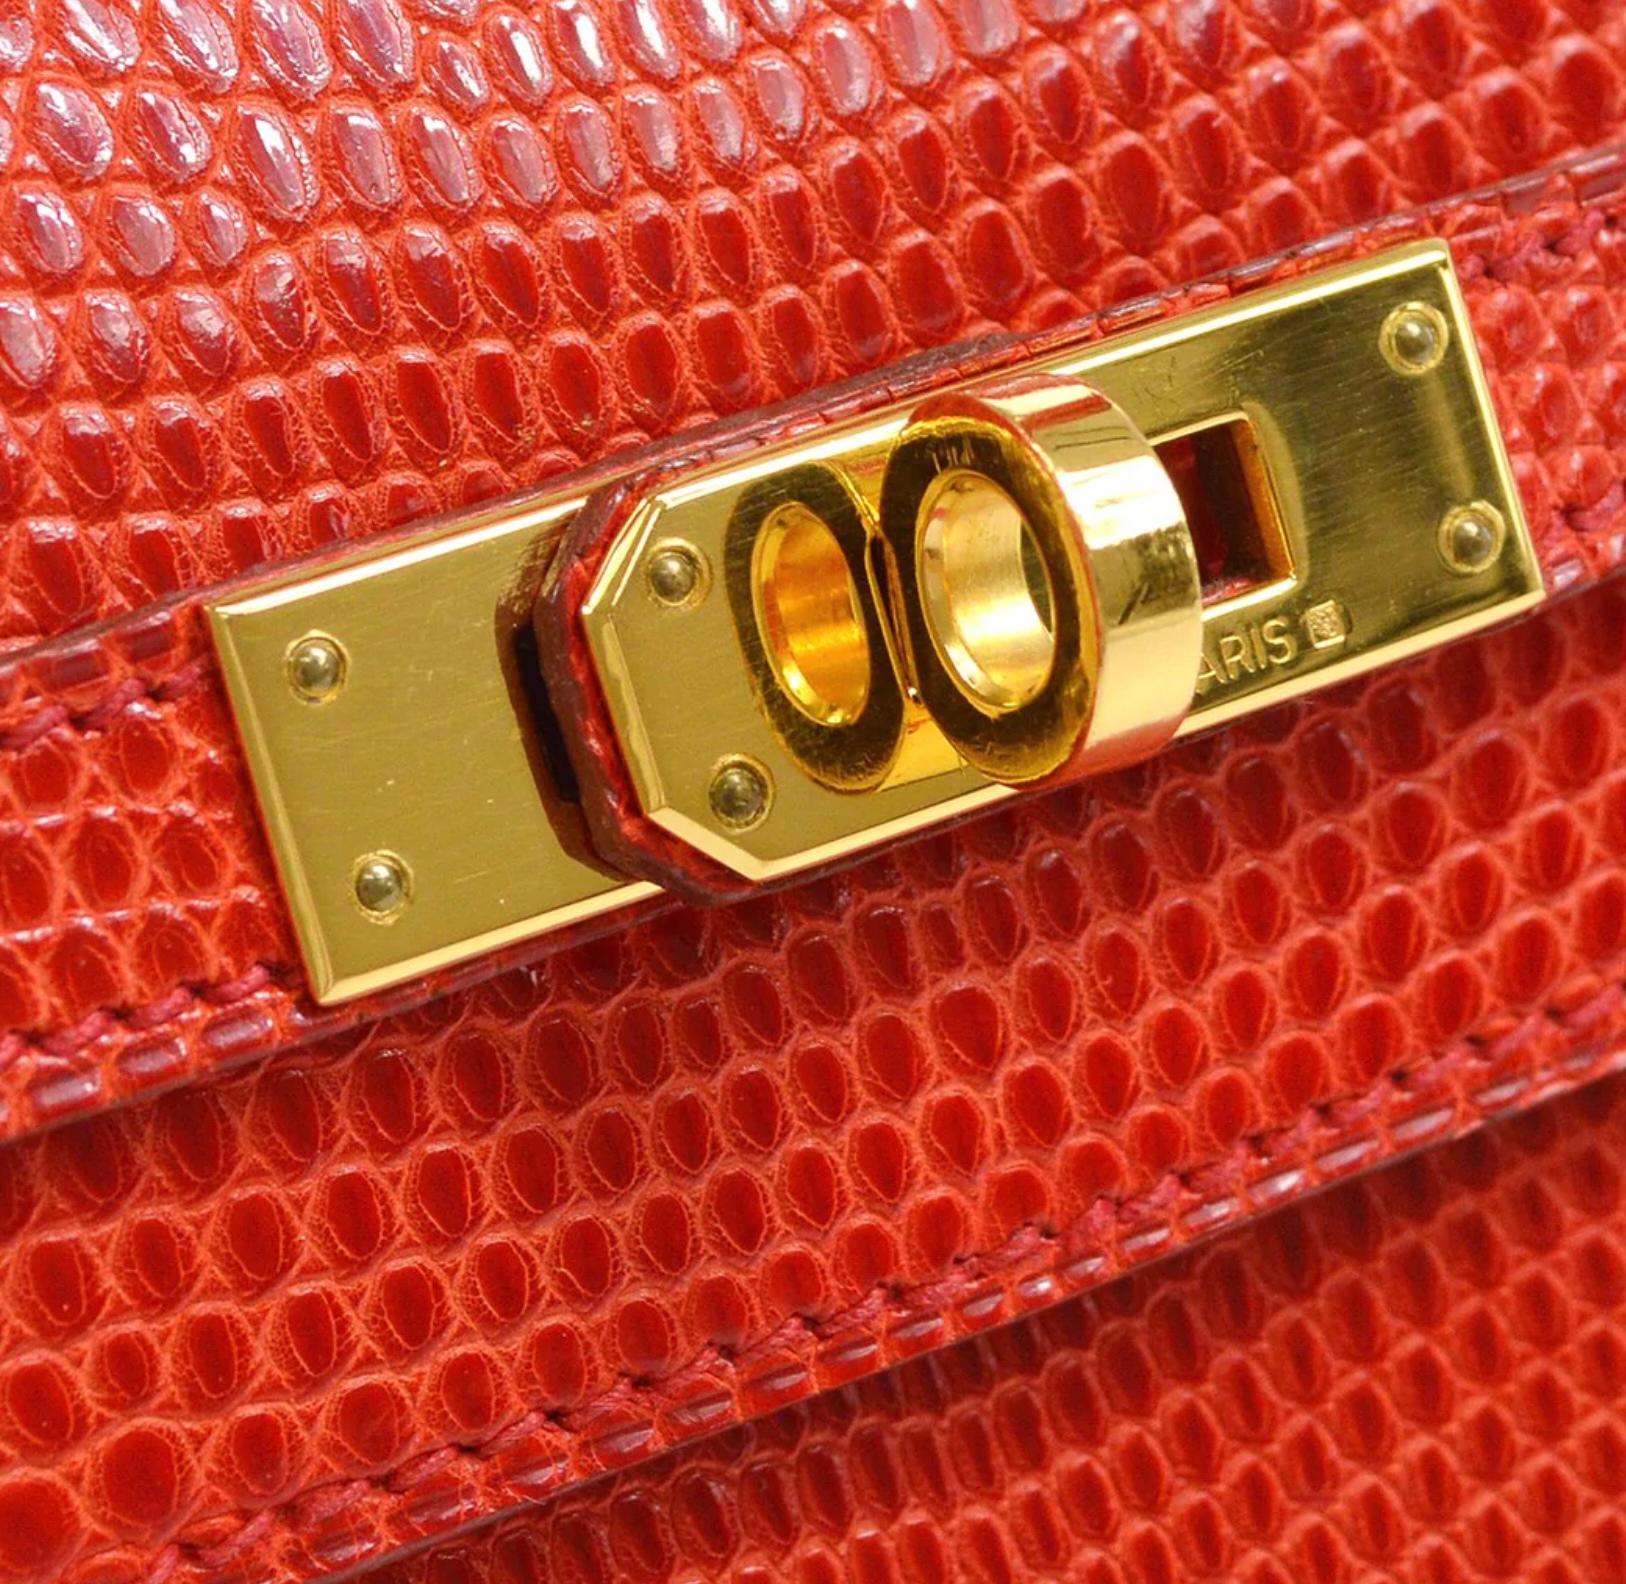 Pre-Owned Vintage Condition
From 1999 Collection
Rouge VIF
Lizard Leather
Gold Tone Hardware
Leather Lining 
Measures 8